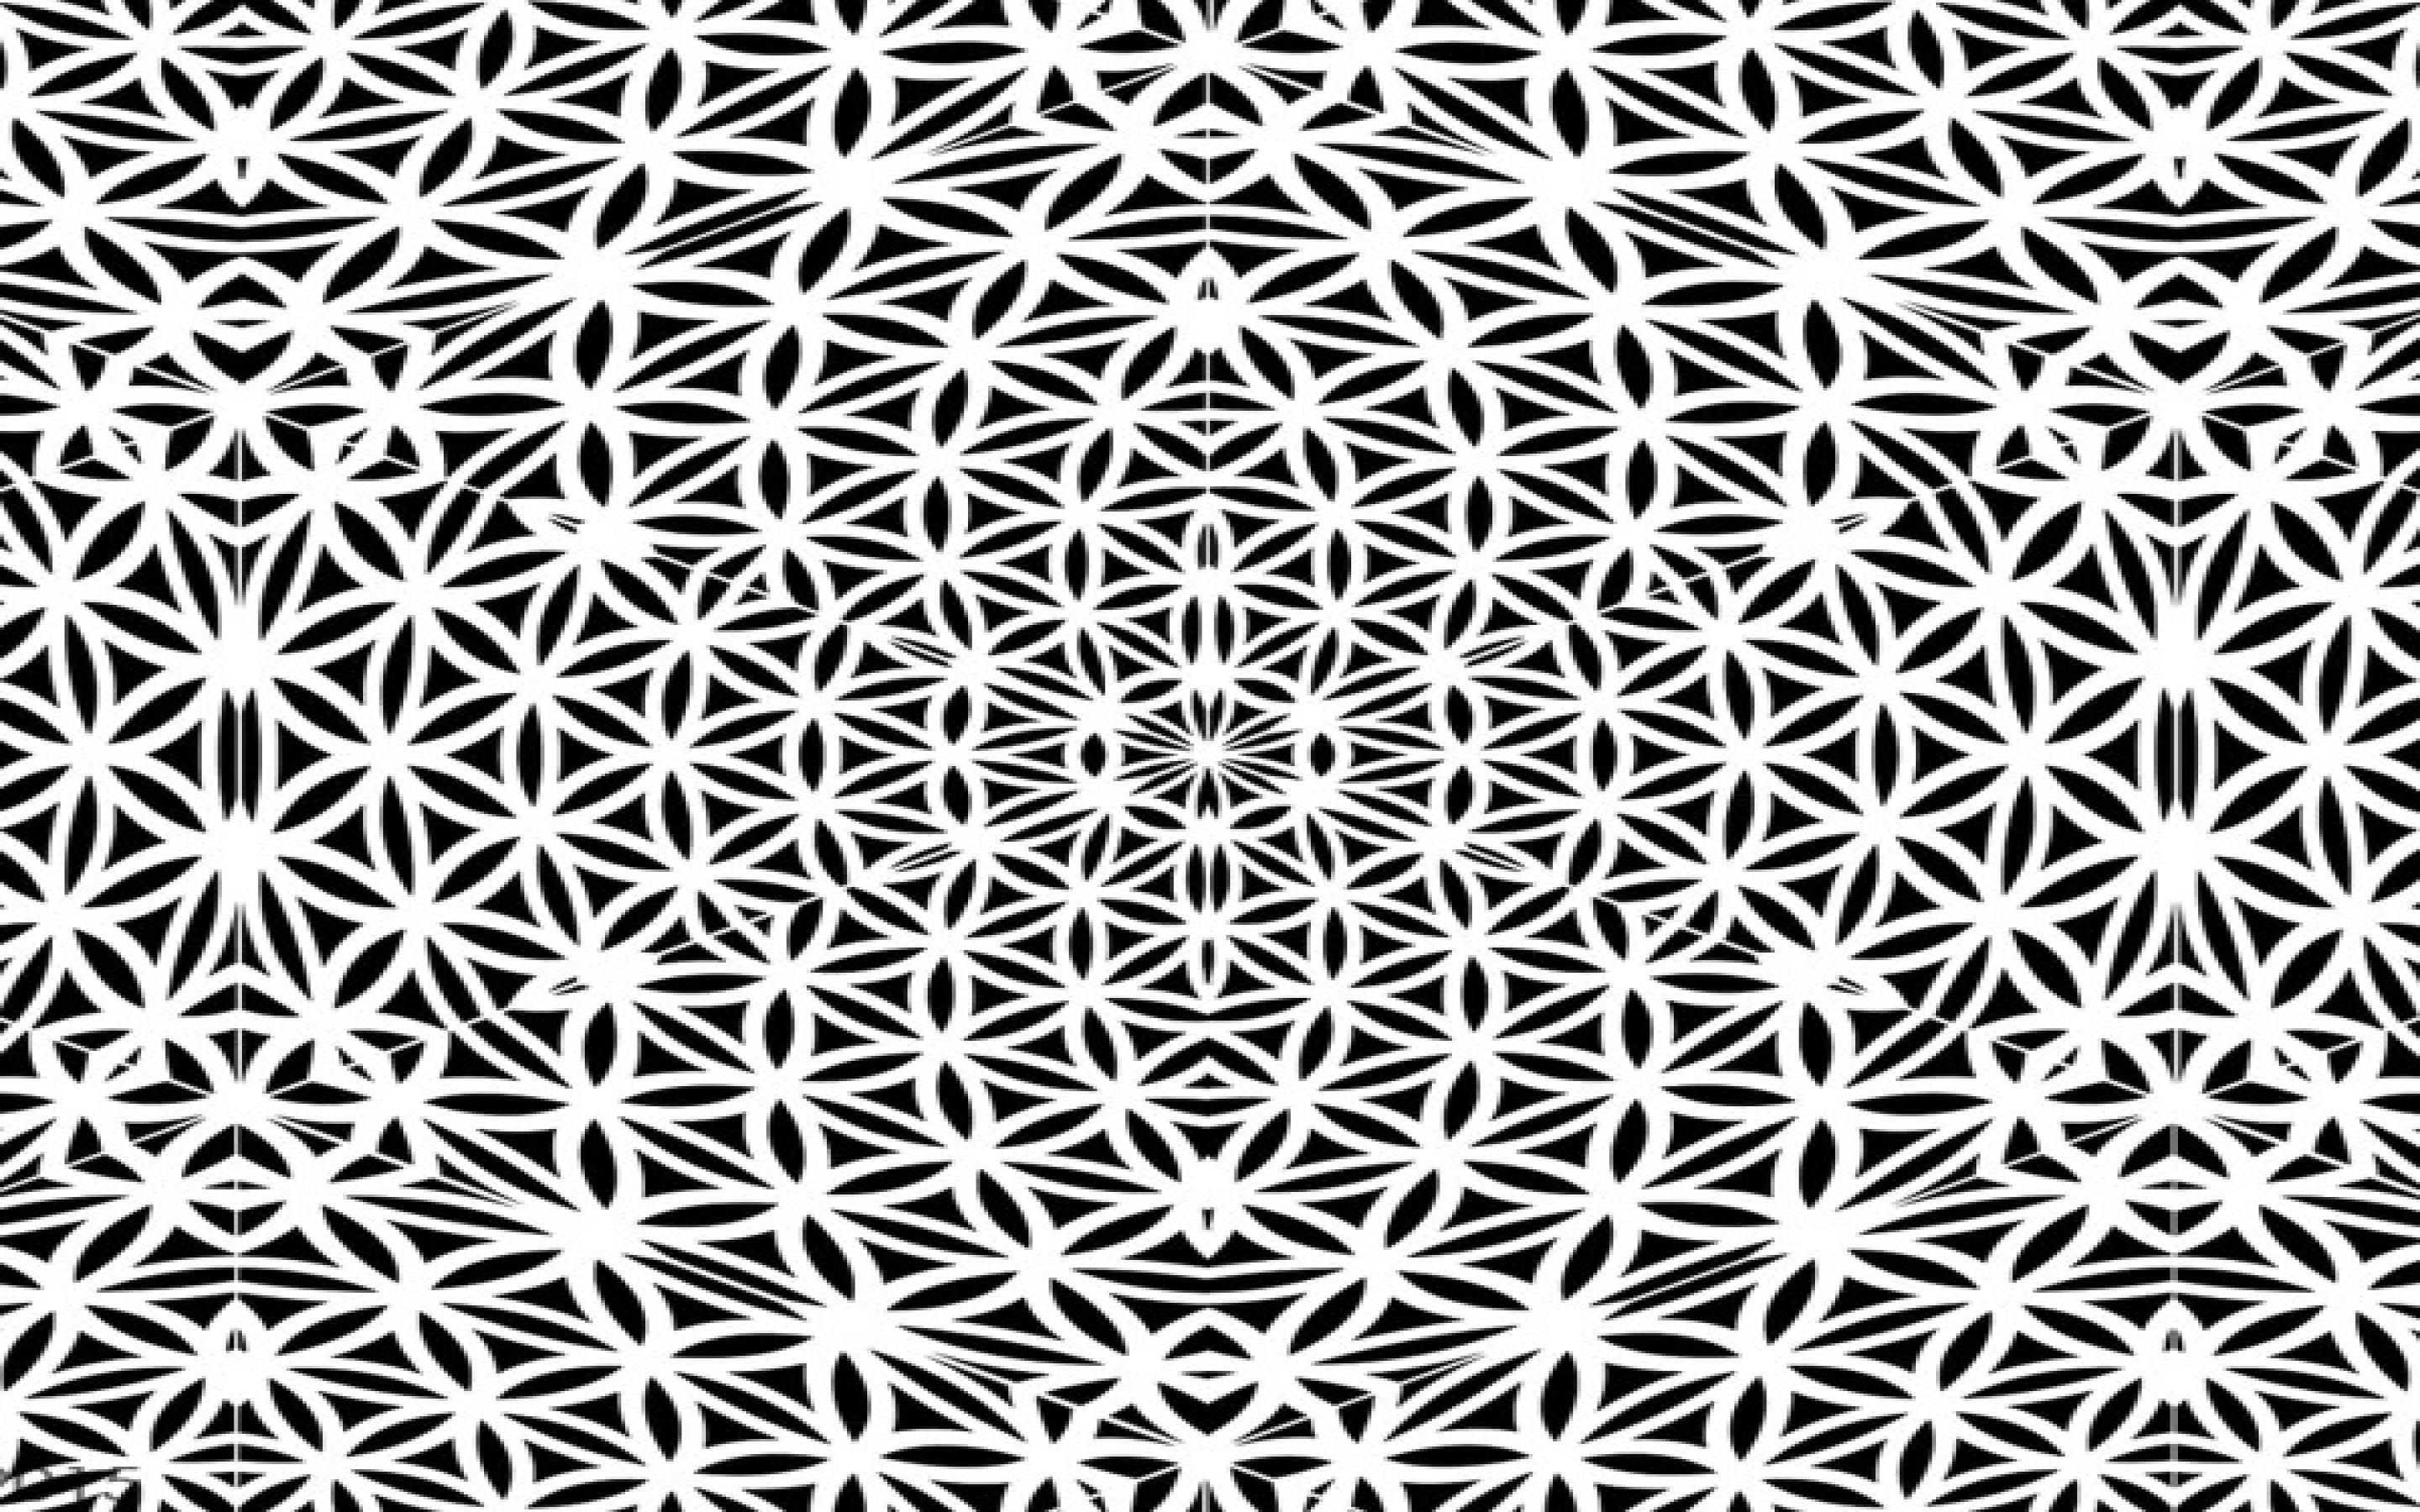 Flower of Life Wallpapers - Top Free Flower of Life Backgrounds